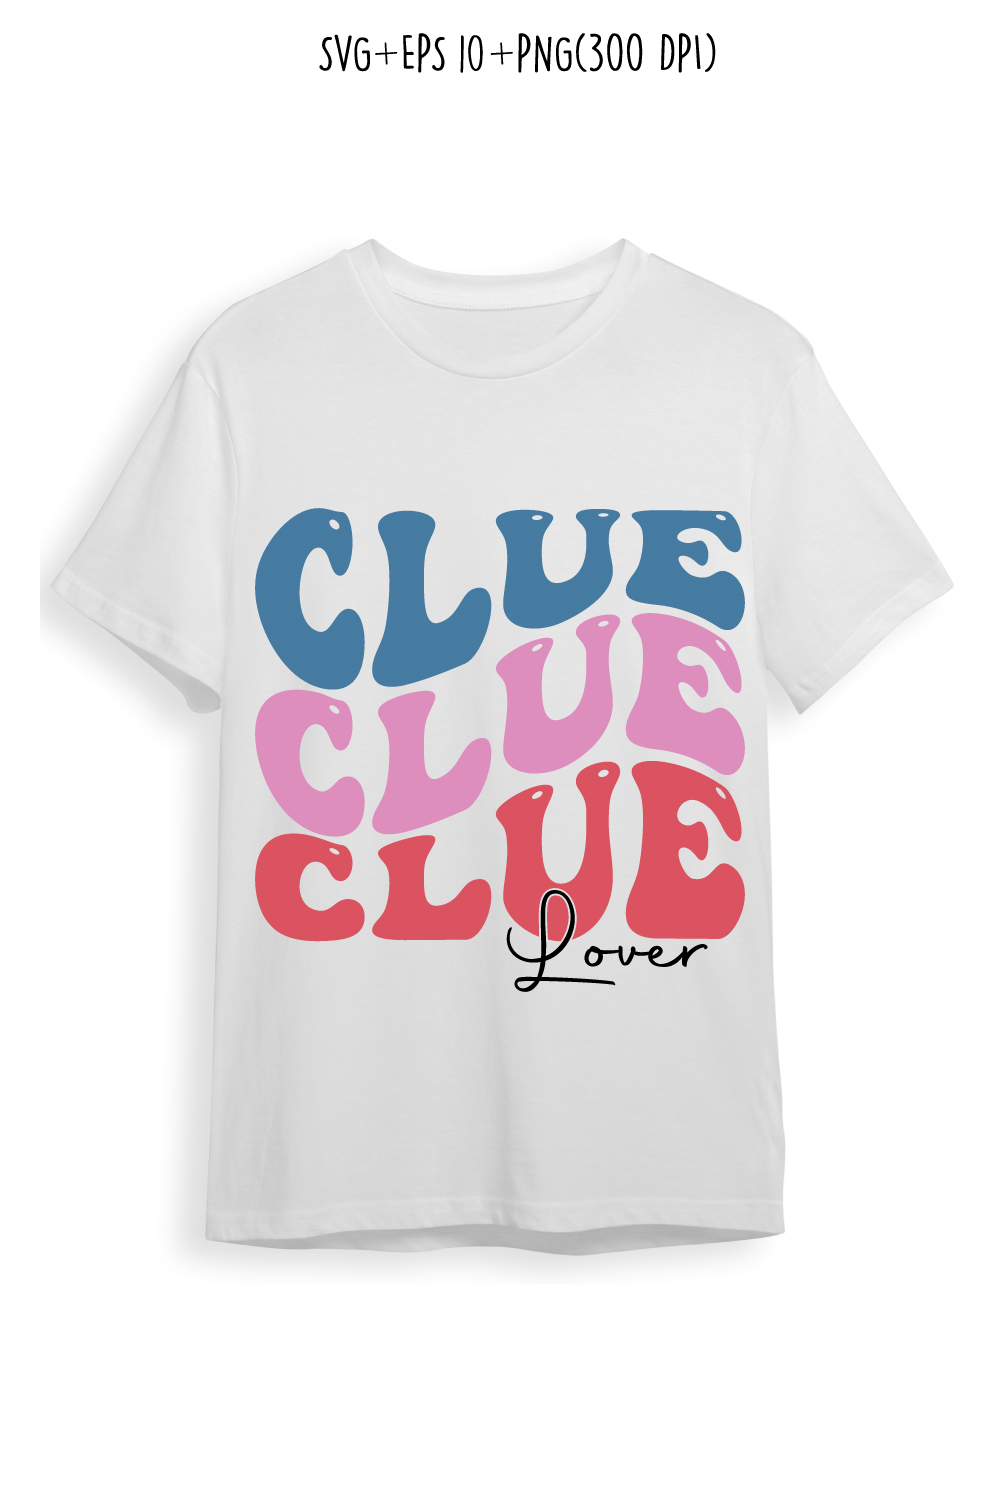 Clue lover indoor game retro typography design for t-shirts, cards, frame artwork, phone cases, bags, mugs, stickers, tumblers, print, etc pinterest preview image.